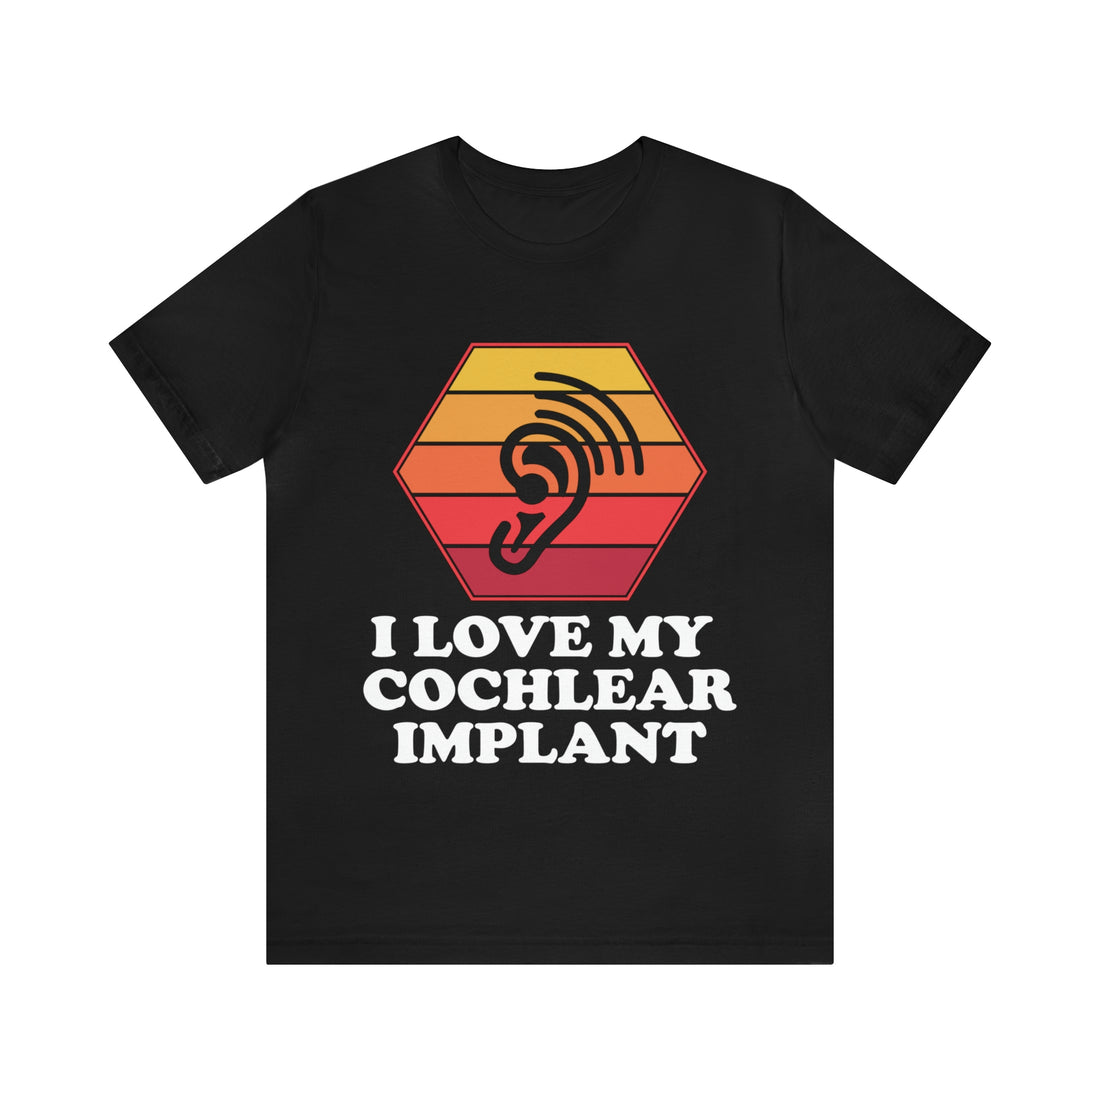 I Love My Cochlear Implant - Unisex Jersey Short Sleeve Tee